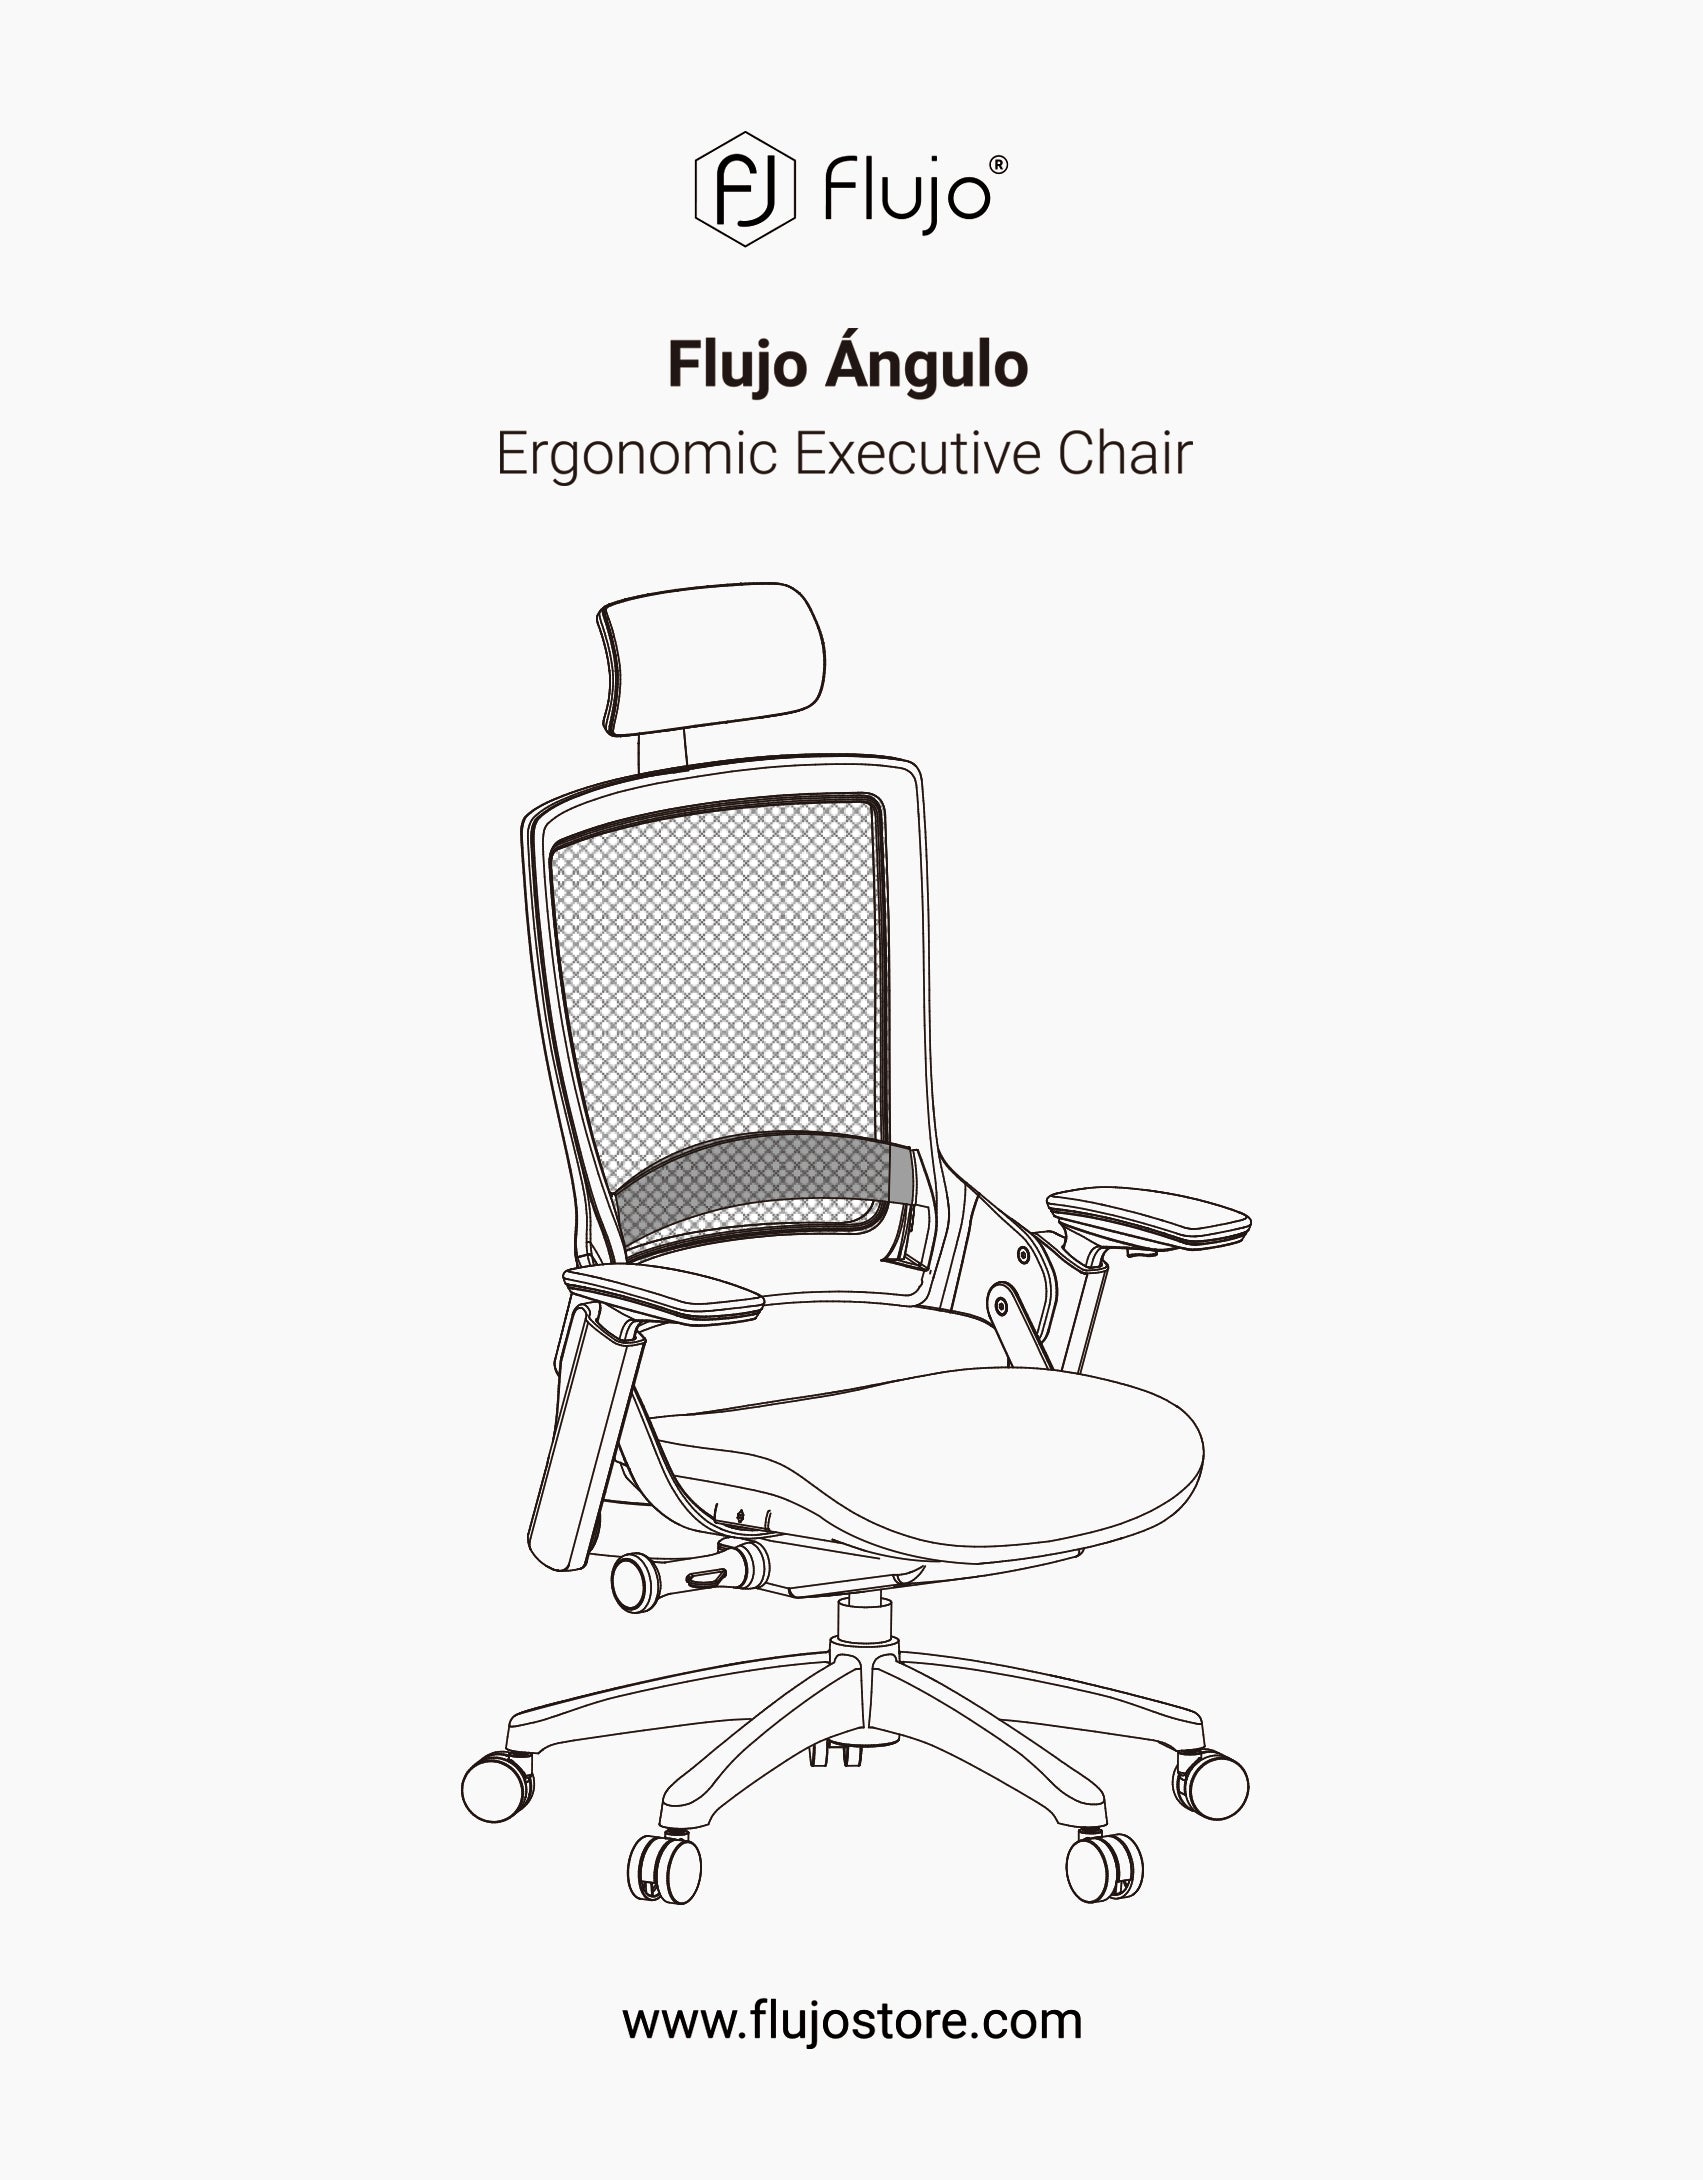 Drawing of the Flujo Ángulo Ergonomic Executive Chair, showcasing a mesh back and headrest for ergonomic comfort, part of Flujo's office furniture collection.